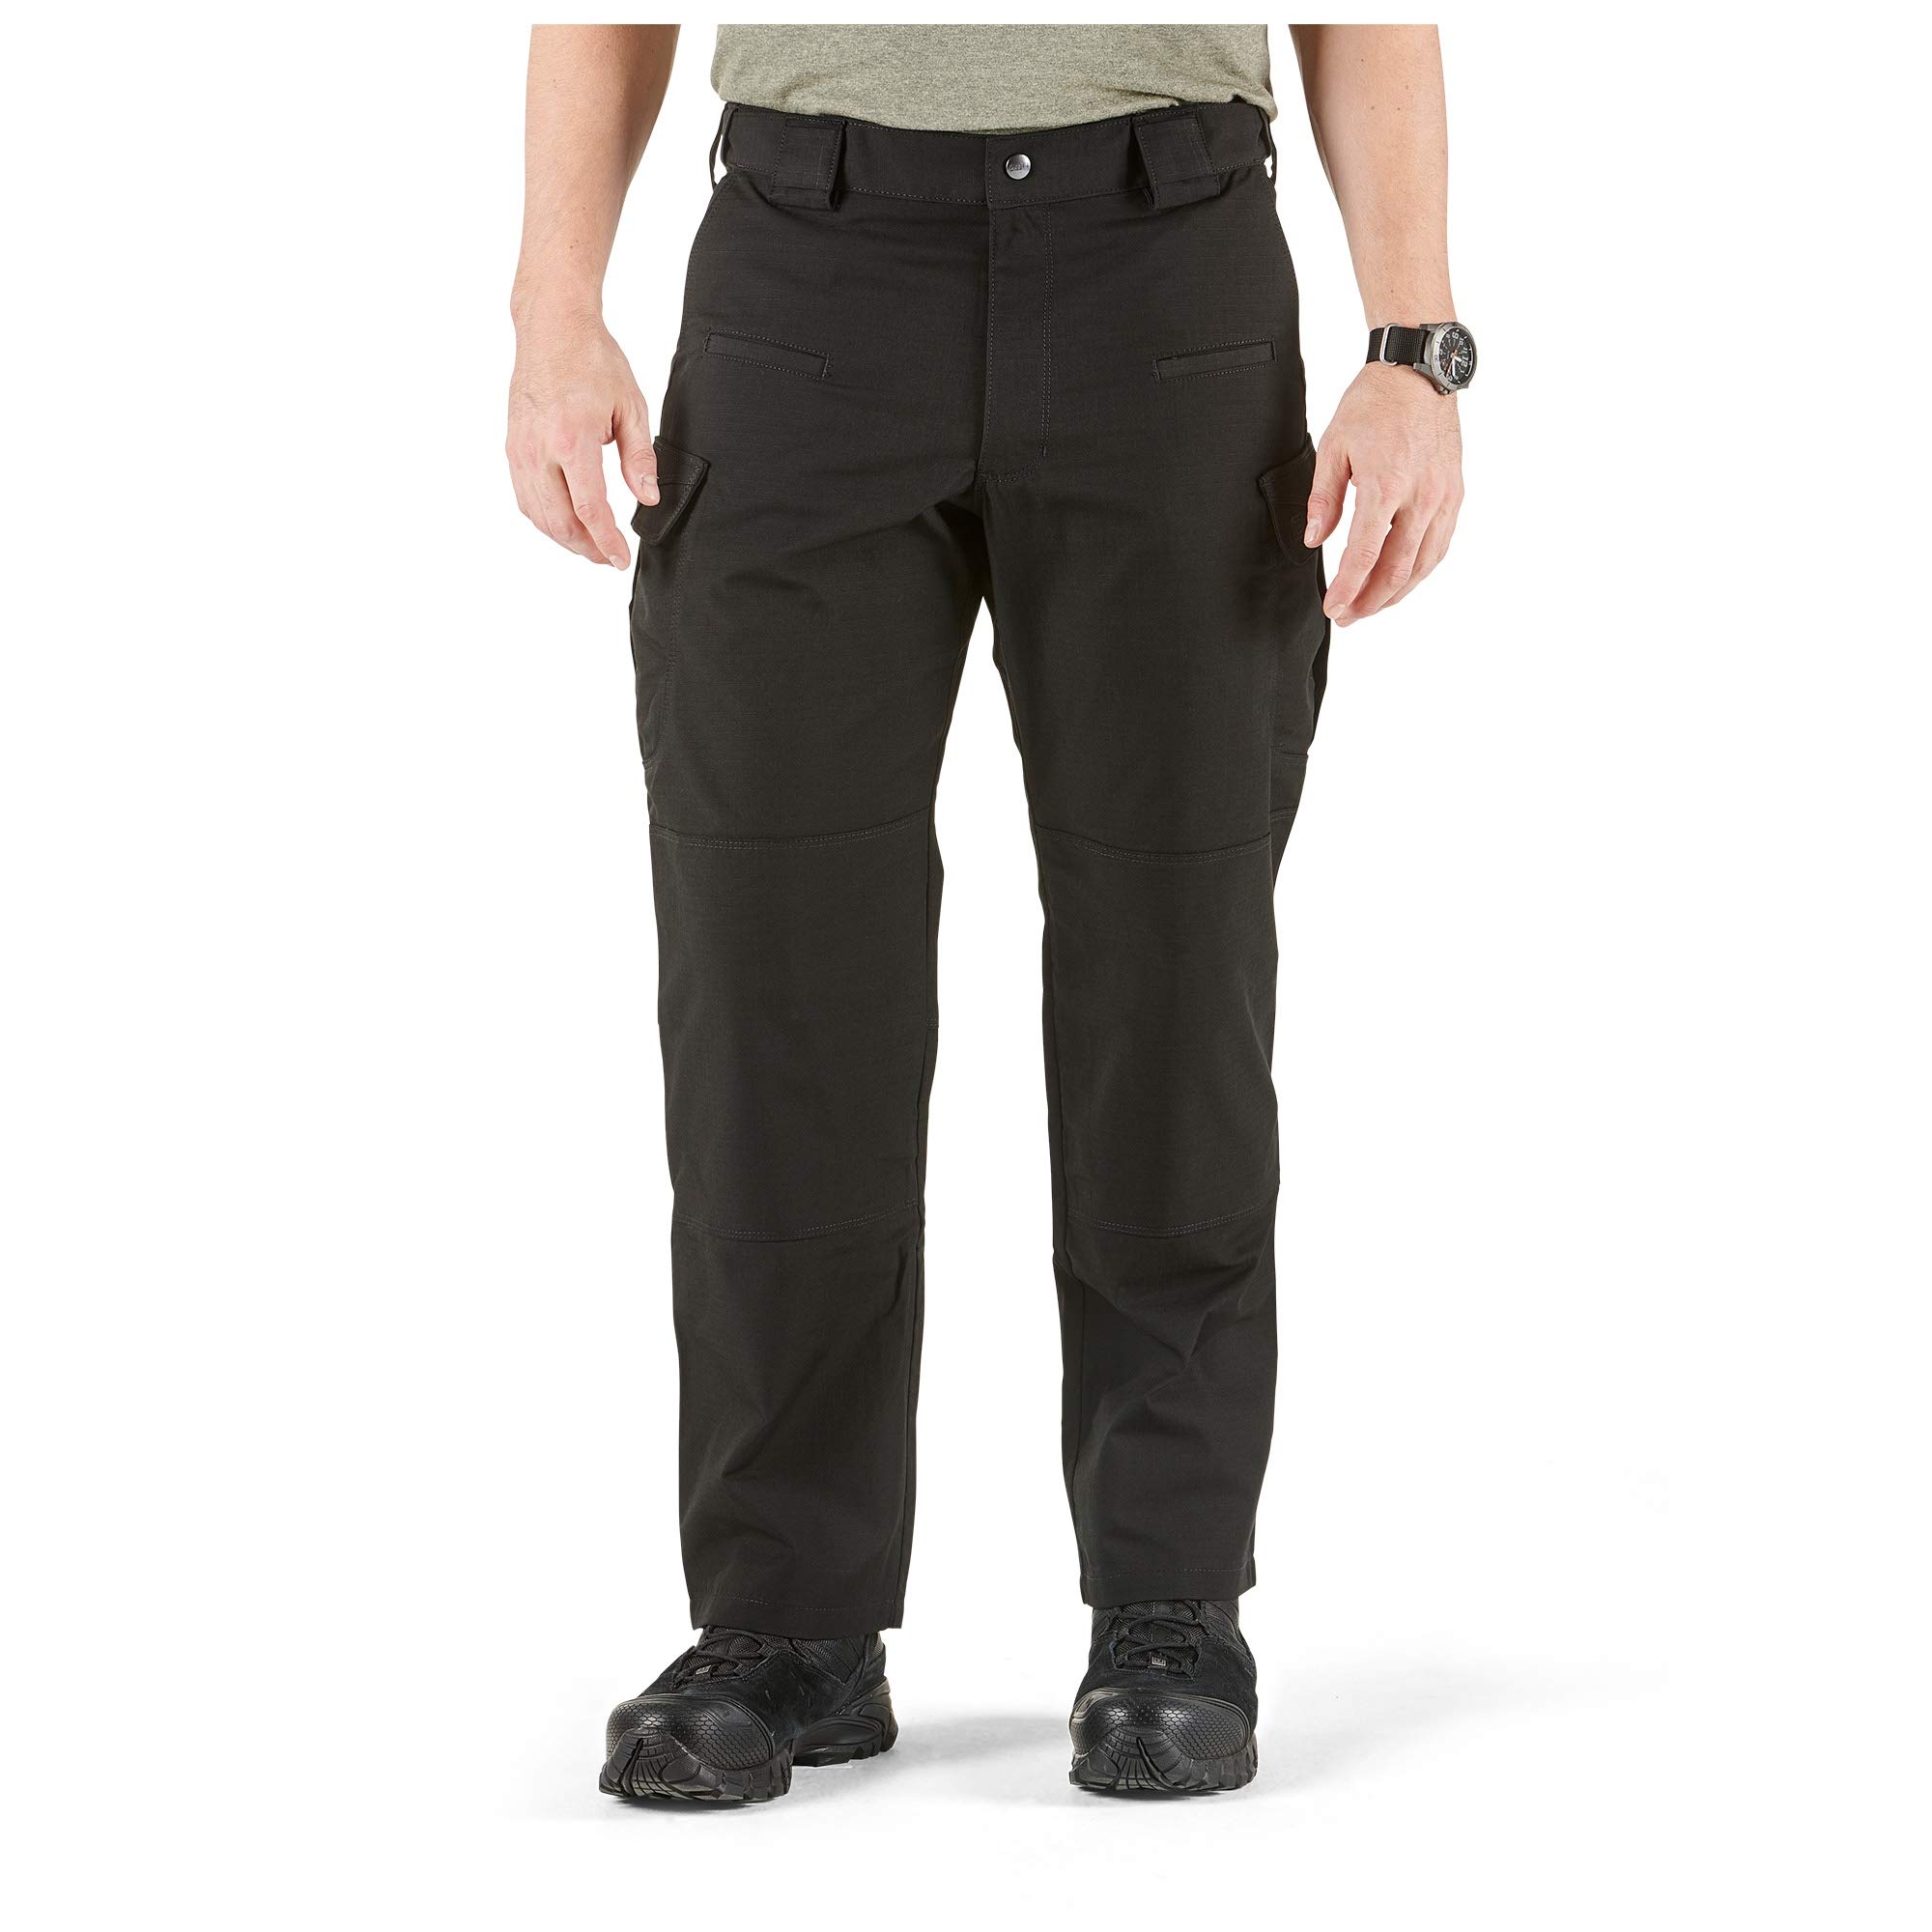 Women's NYPD Stryke Ripstop Pants - Comfort & Functionality